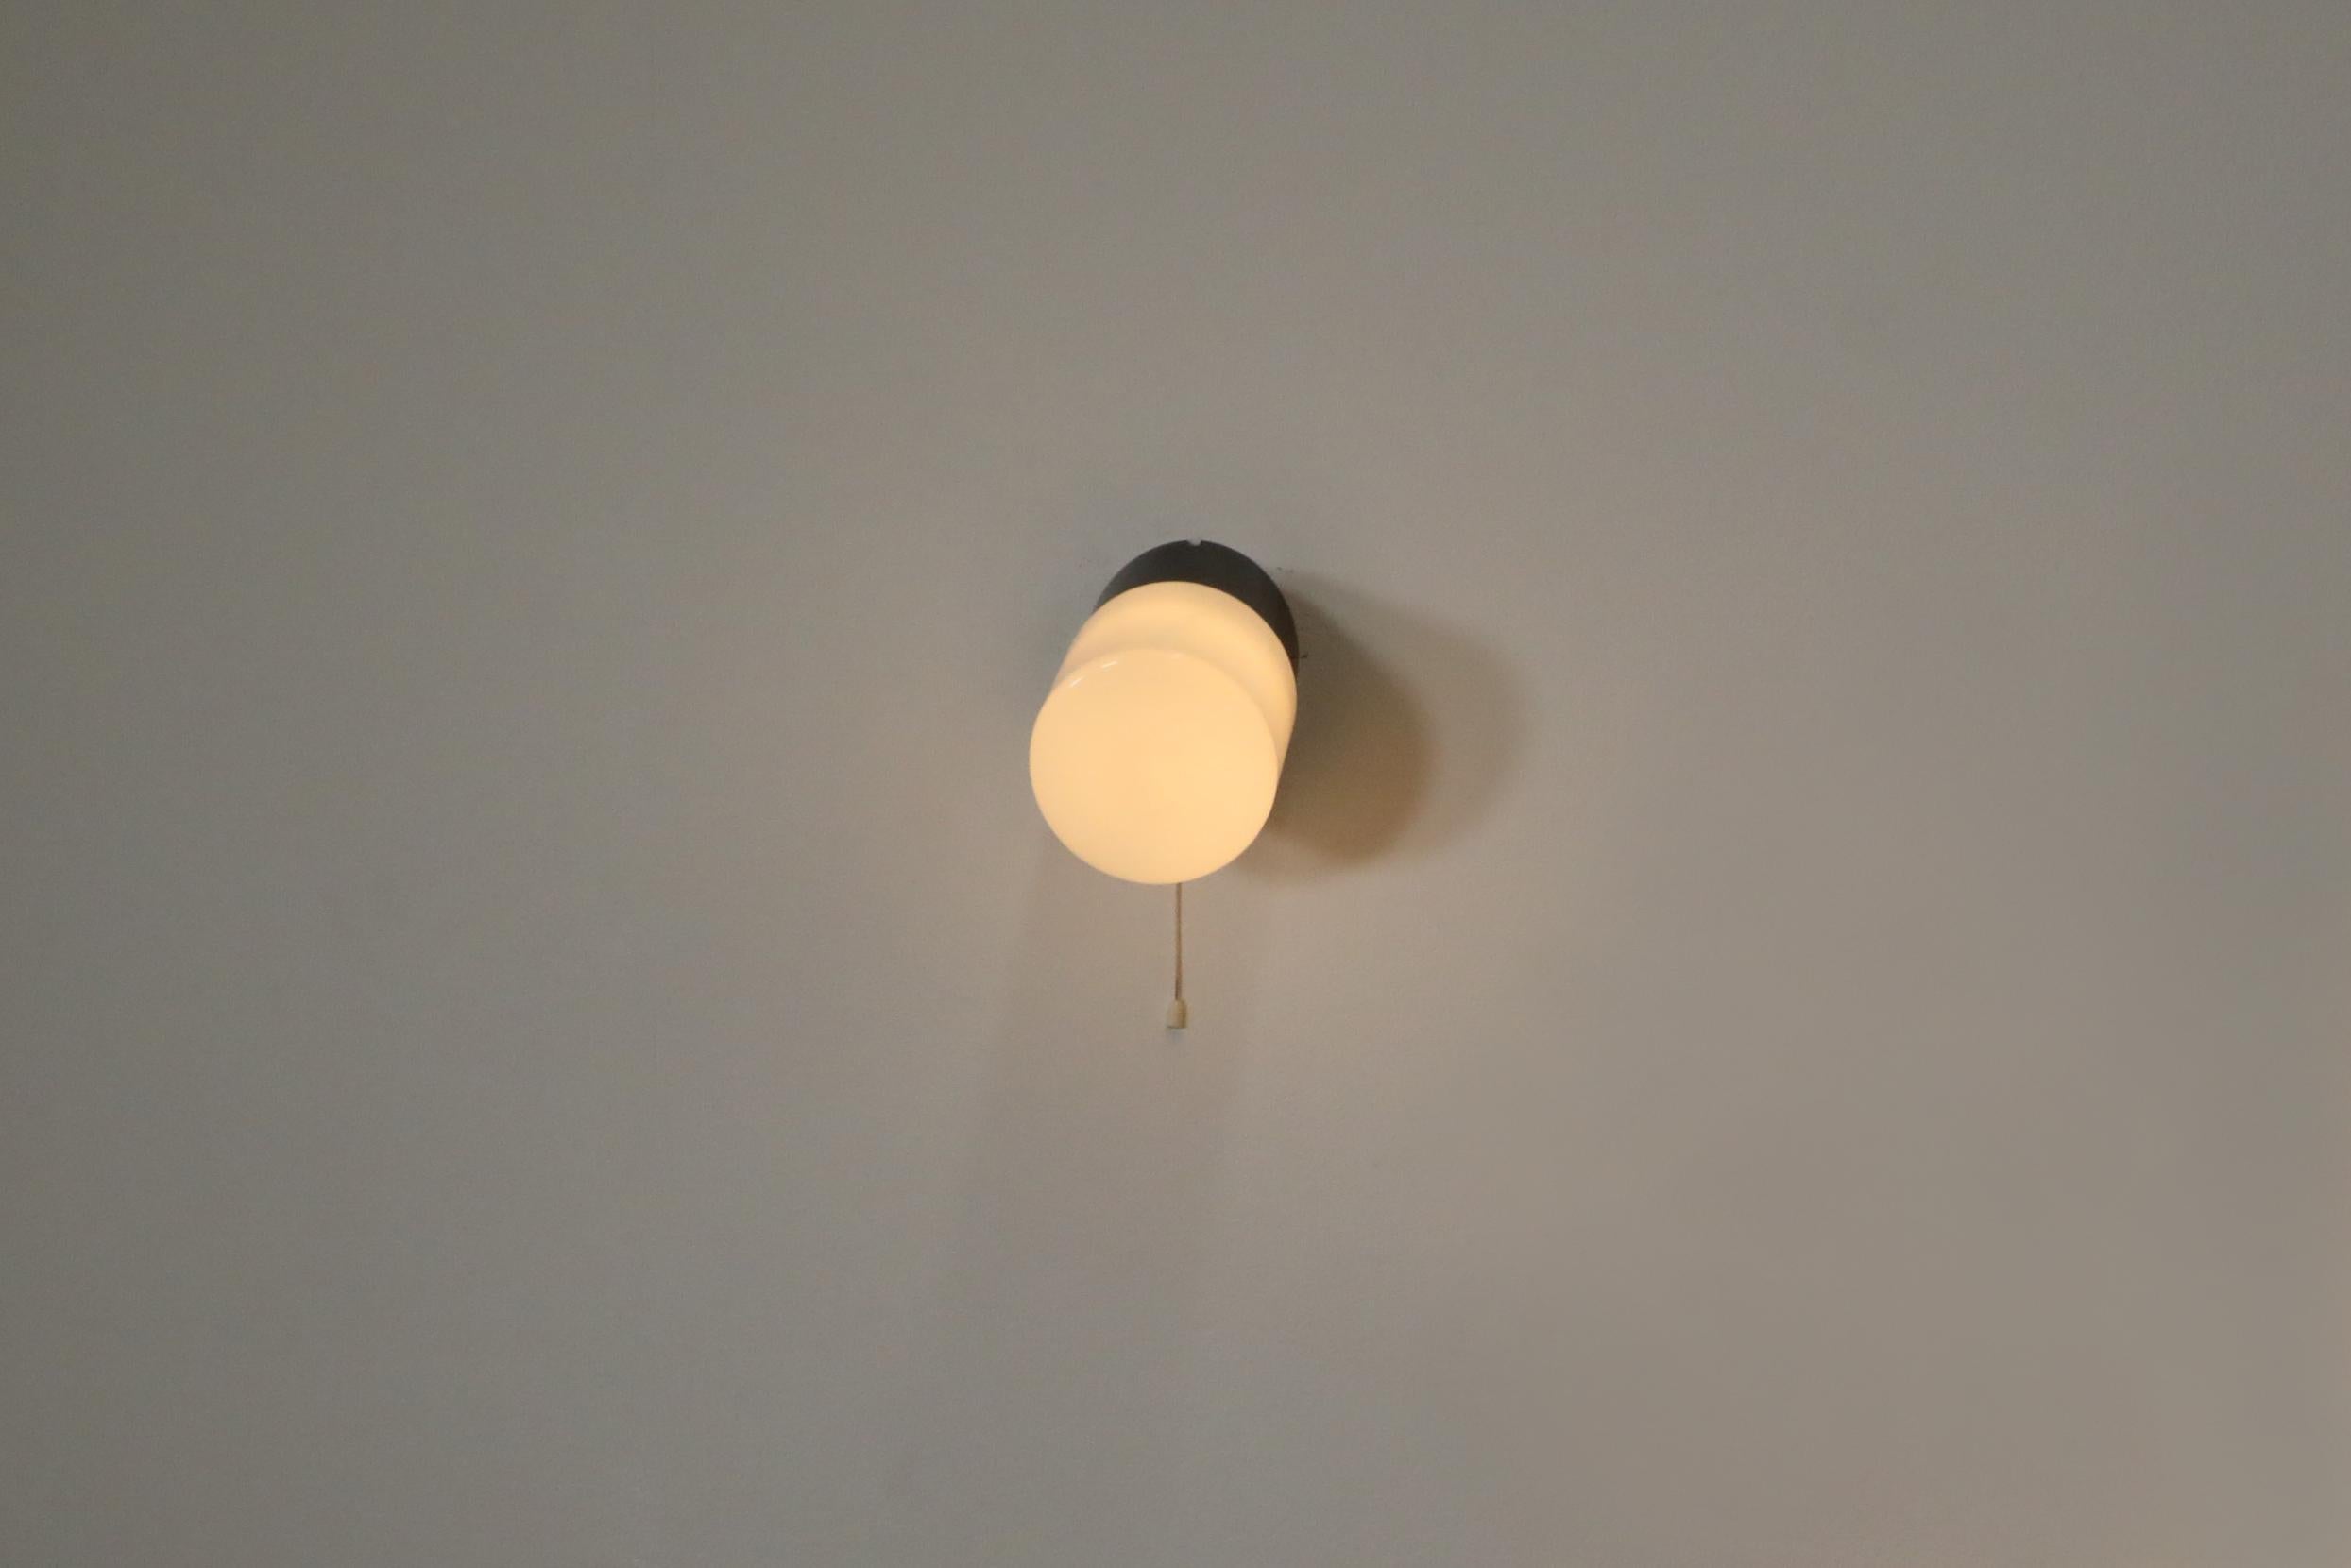 Cylinder Milk Glass Sconce with Black Bakelite Base and Pull String Switch In Good Condition For Sale In Los Angeles, CA